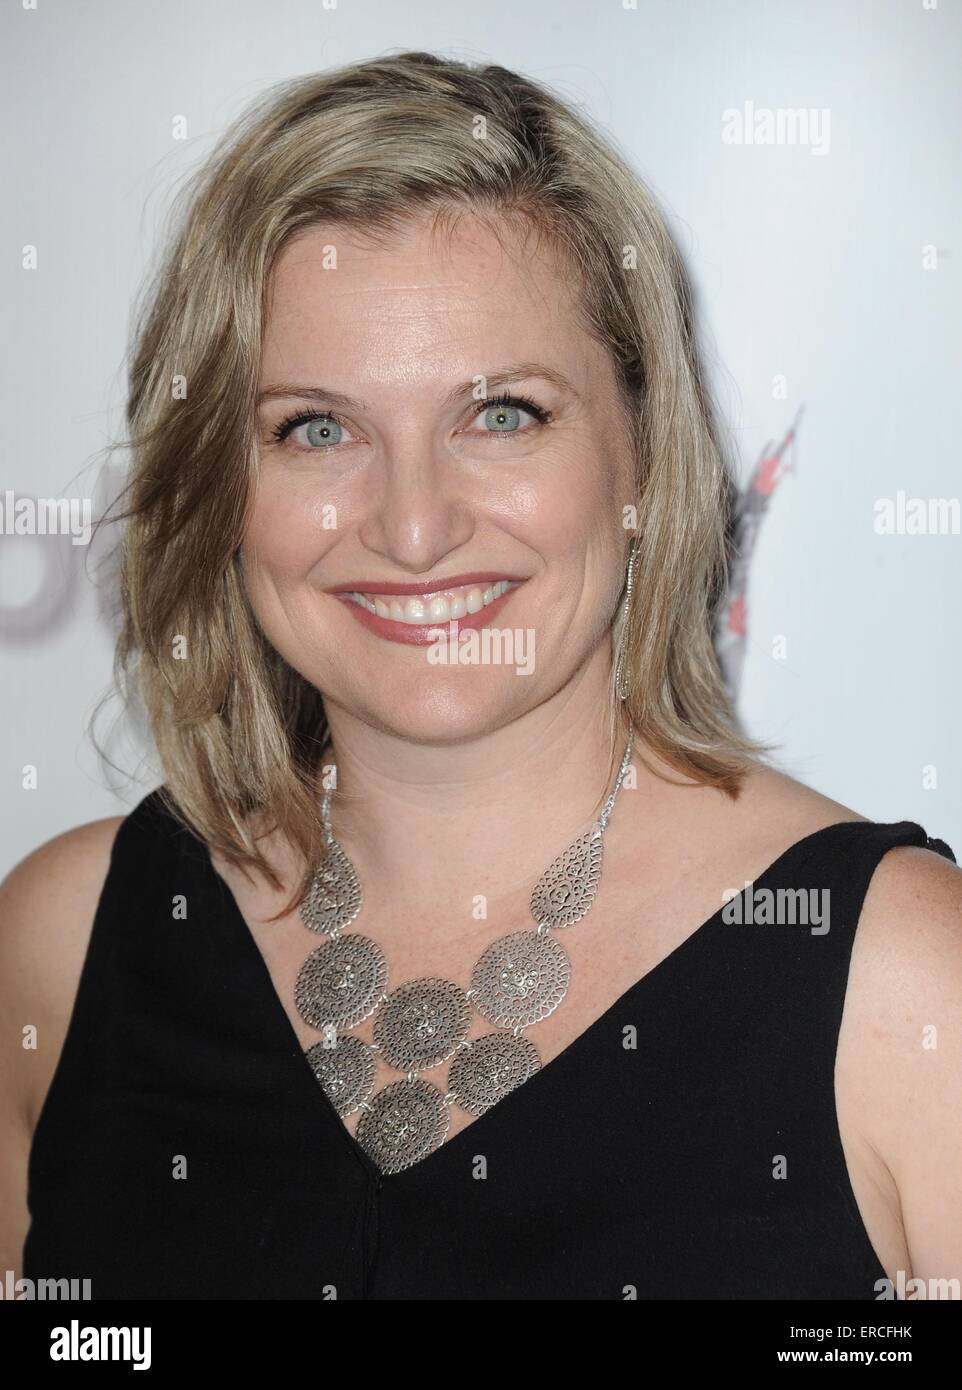 Maria McCann at arrivals for THE AFTERMATH World Premiere, TCL Chinese 6 Theatres (formerly Grauman's), Los Angeles, CA May 31, 2015. Stock Photo